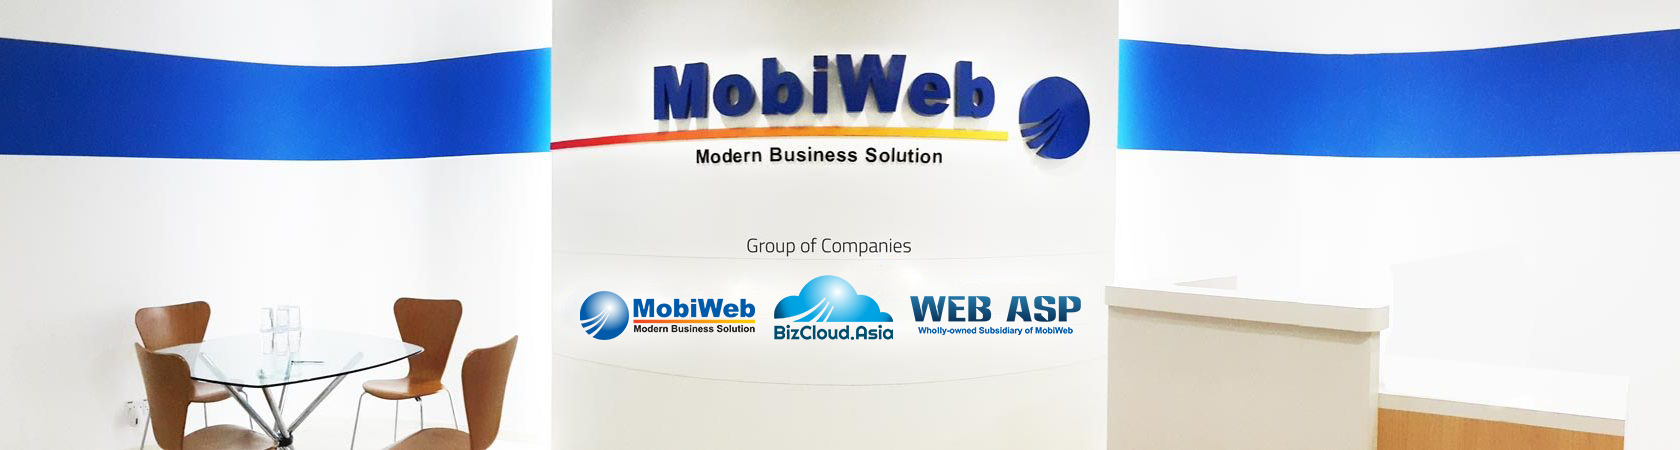 Mobiweb Group of Companies